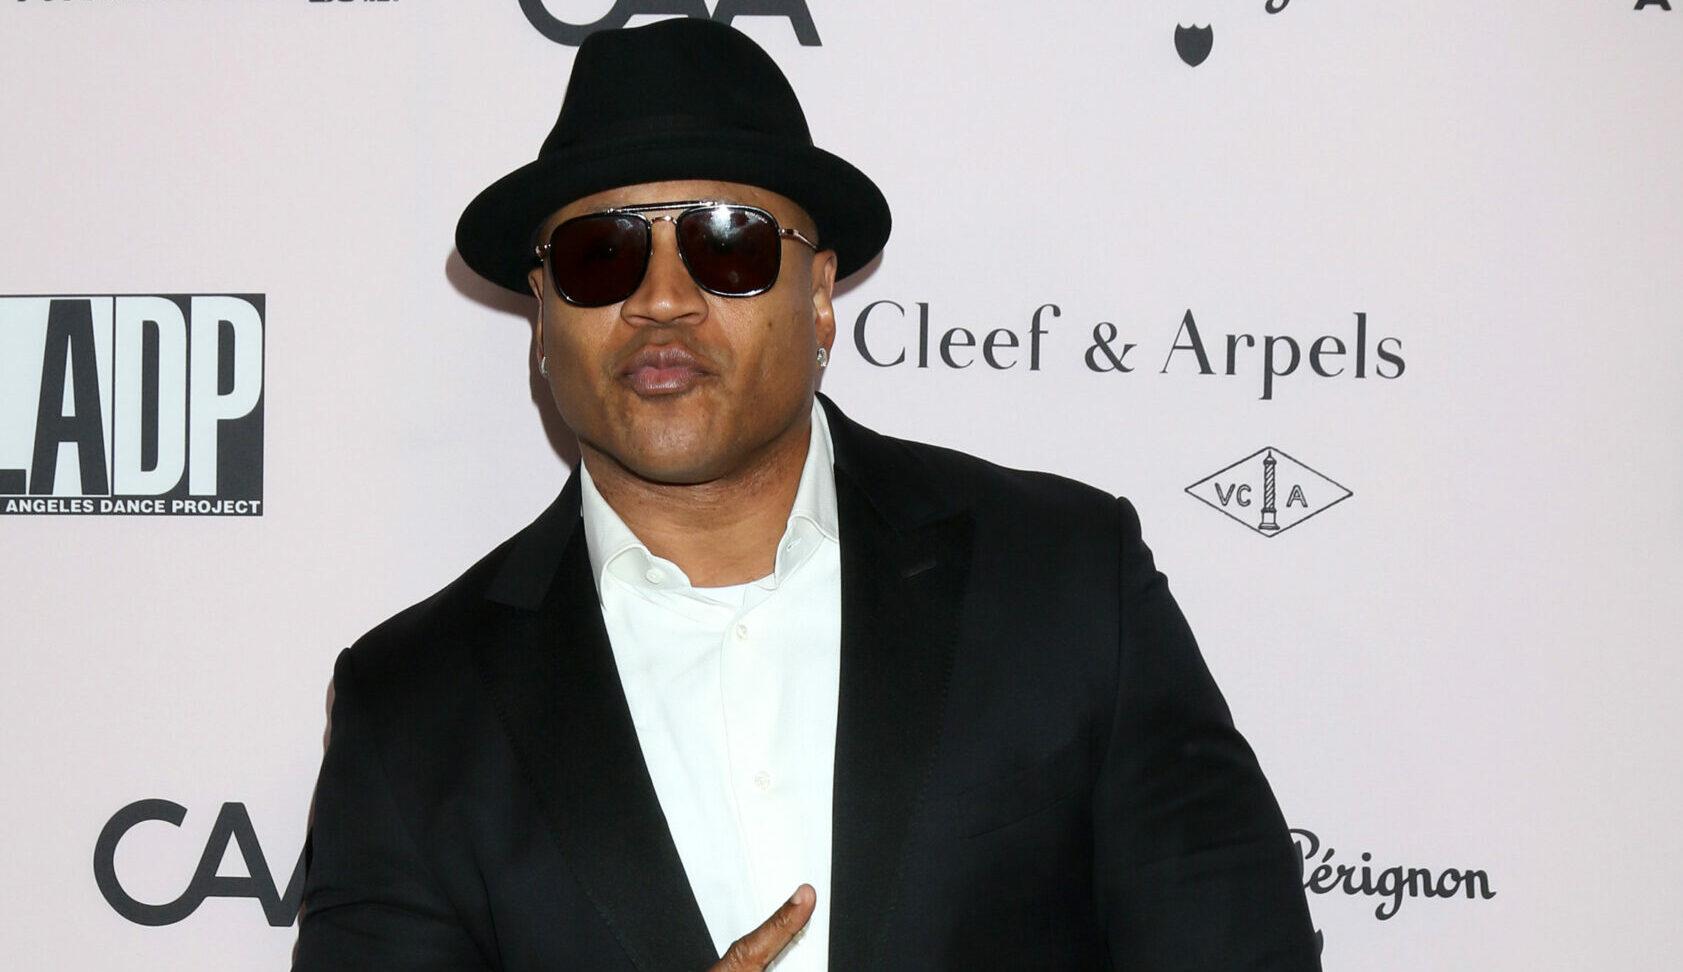 LL Cool J at the L.A. Dance Project Annual Gala at the Hauser & Wirth